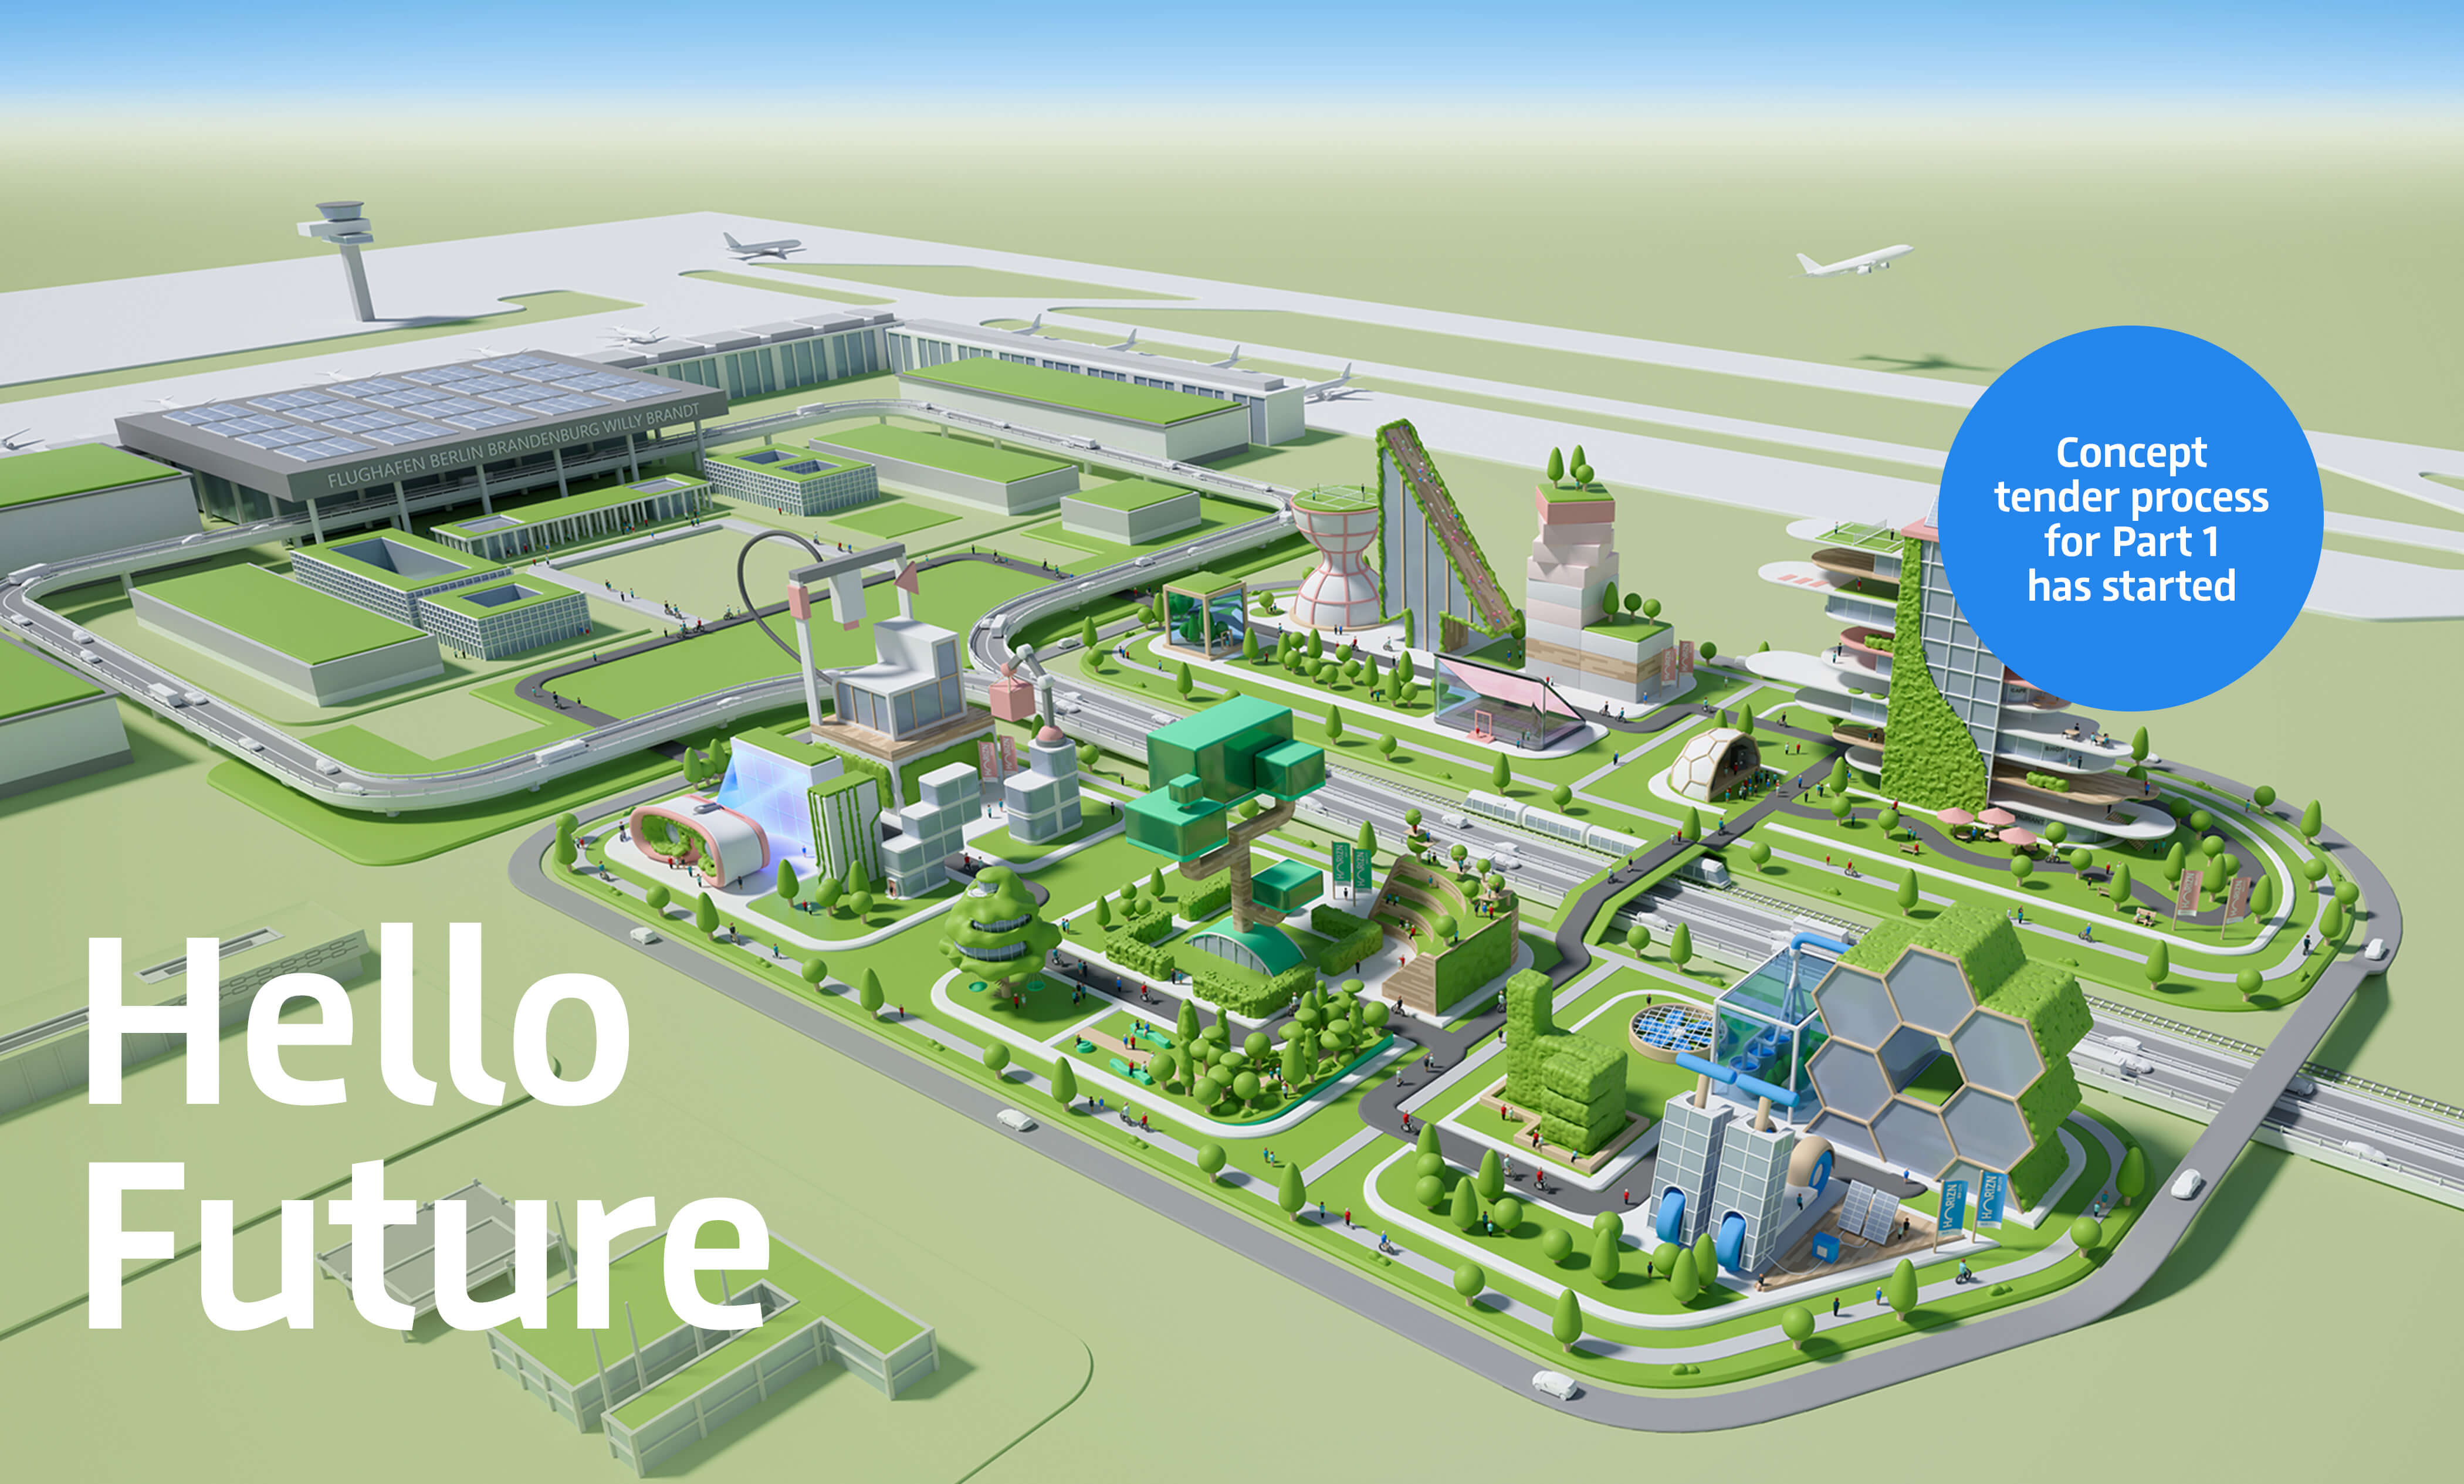 Illustration of the HORIZN BER CITY quarter directly in front of Terminal 1 of BER Airport with innovative building ideas in green surroundings and a friendly colour scheme. © FOREAL® GbR / Flughafen Berlin Brandenburg GmbH 